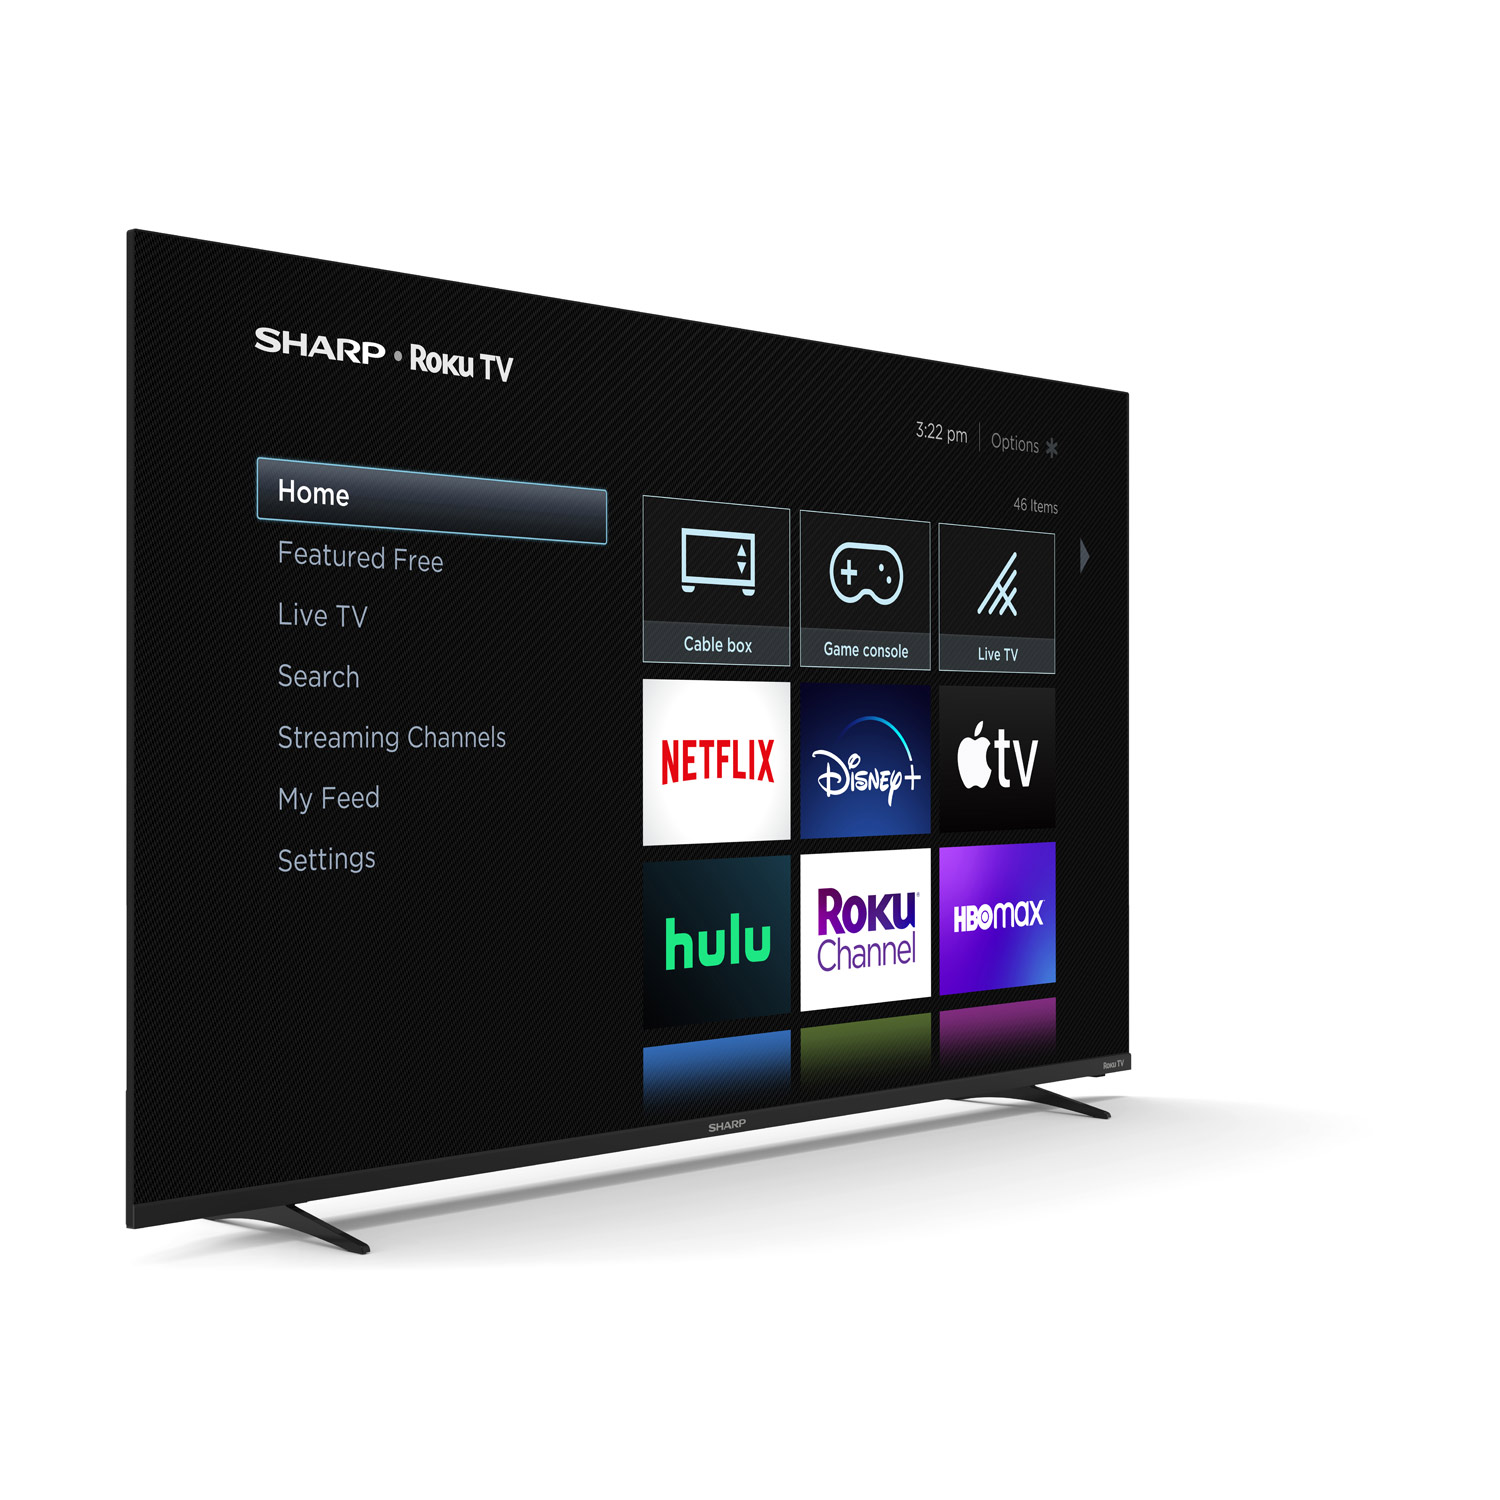 Available Ports on the SHARP® AQUOS 65" Class (64.5" diag.) LED 4K Smart Roku TV with HDR10 (4T-C65DL7UR)